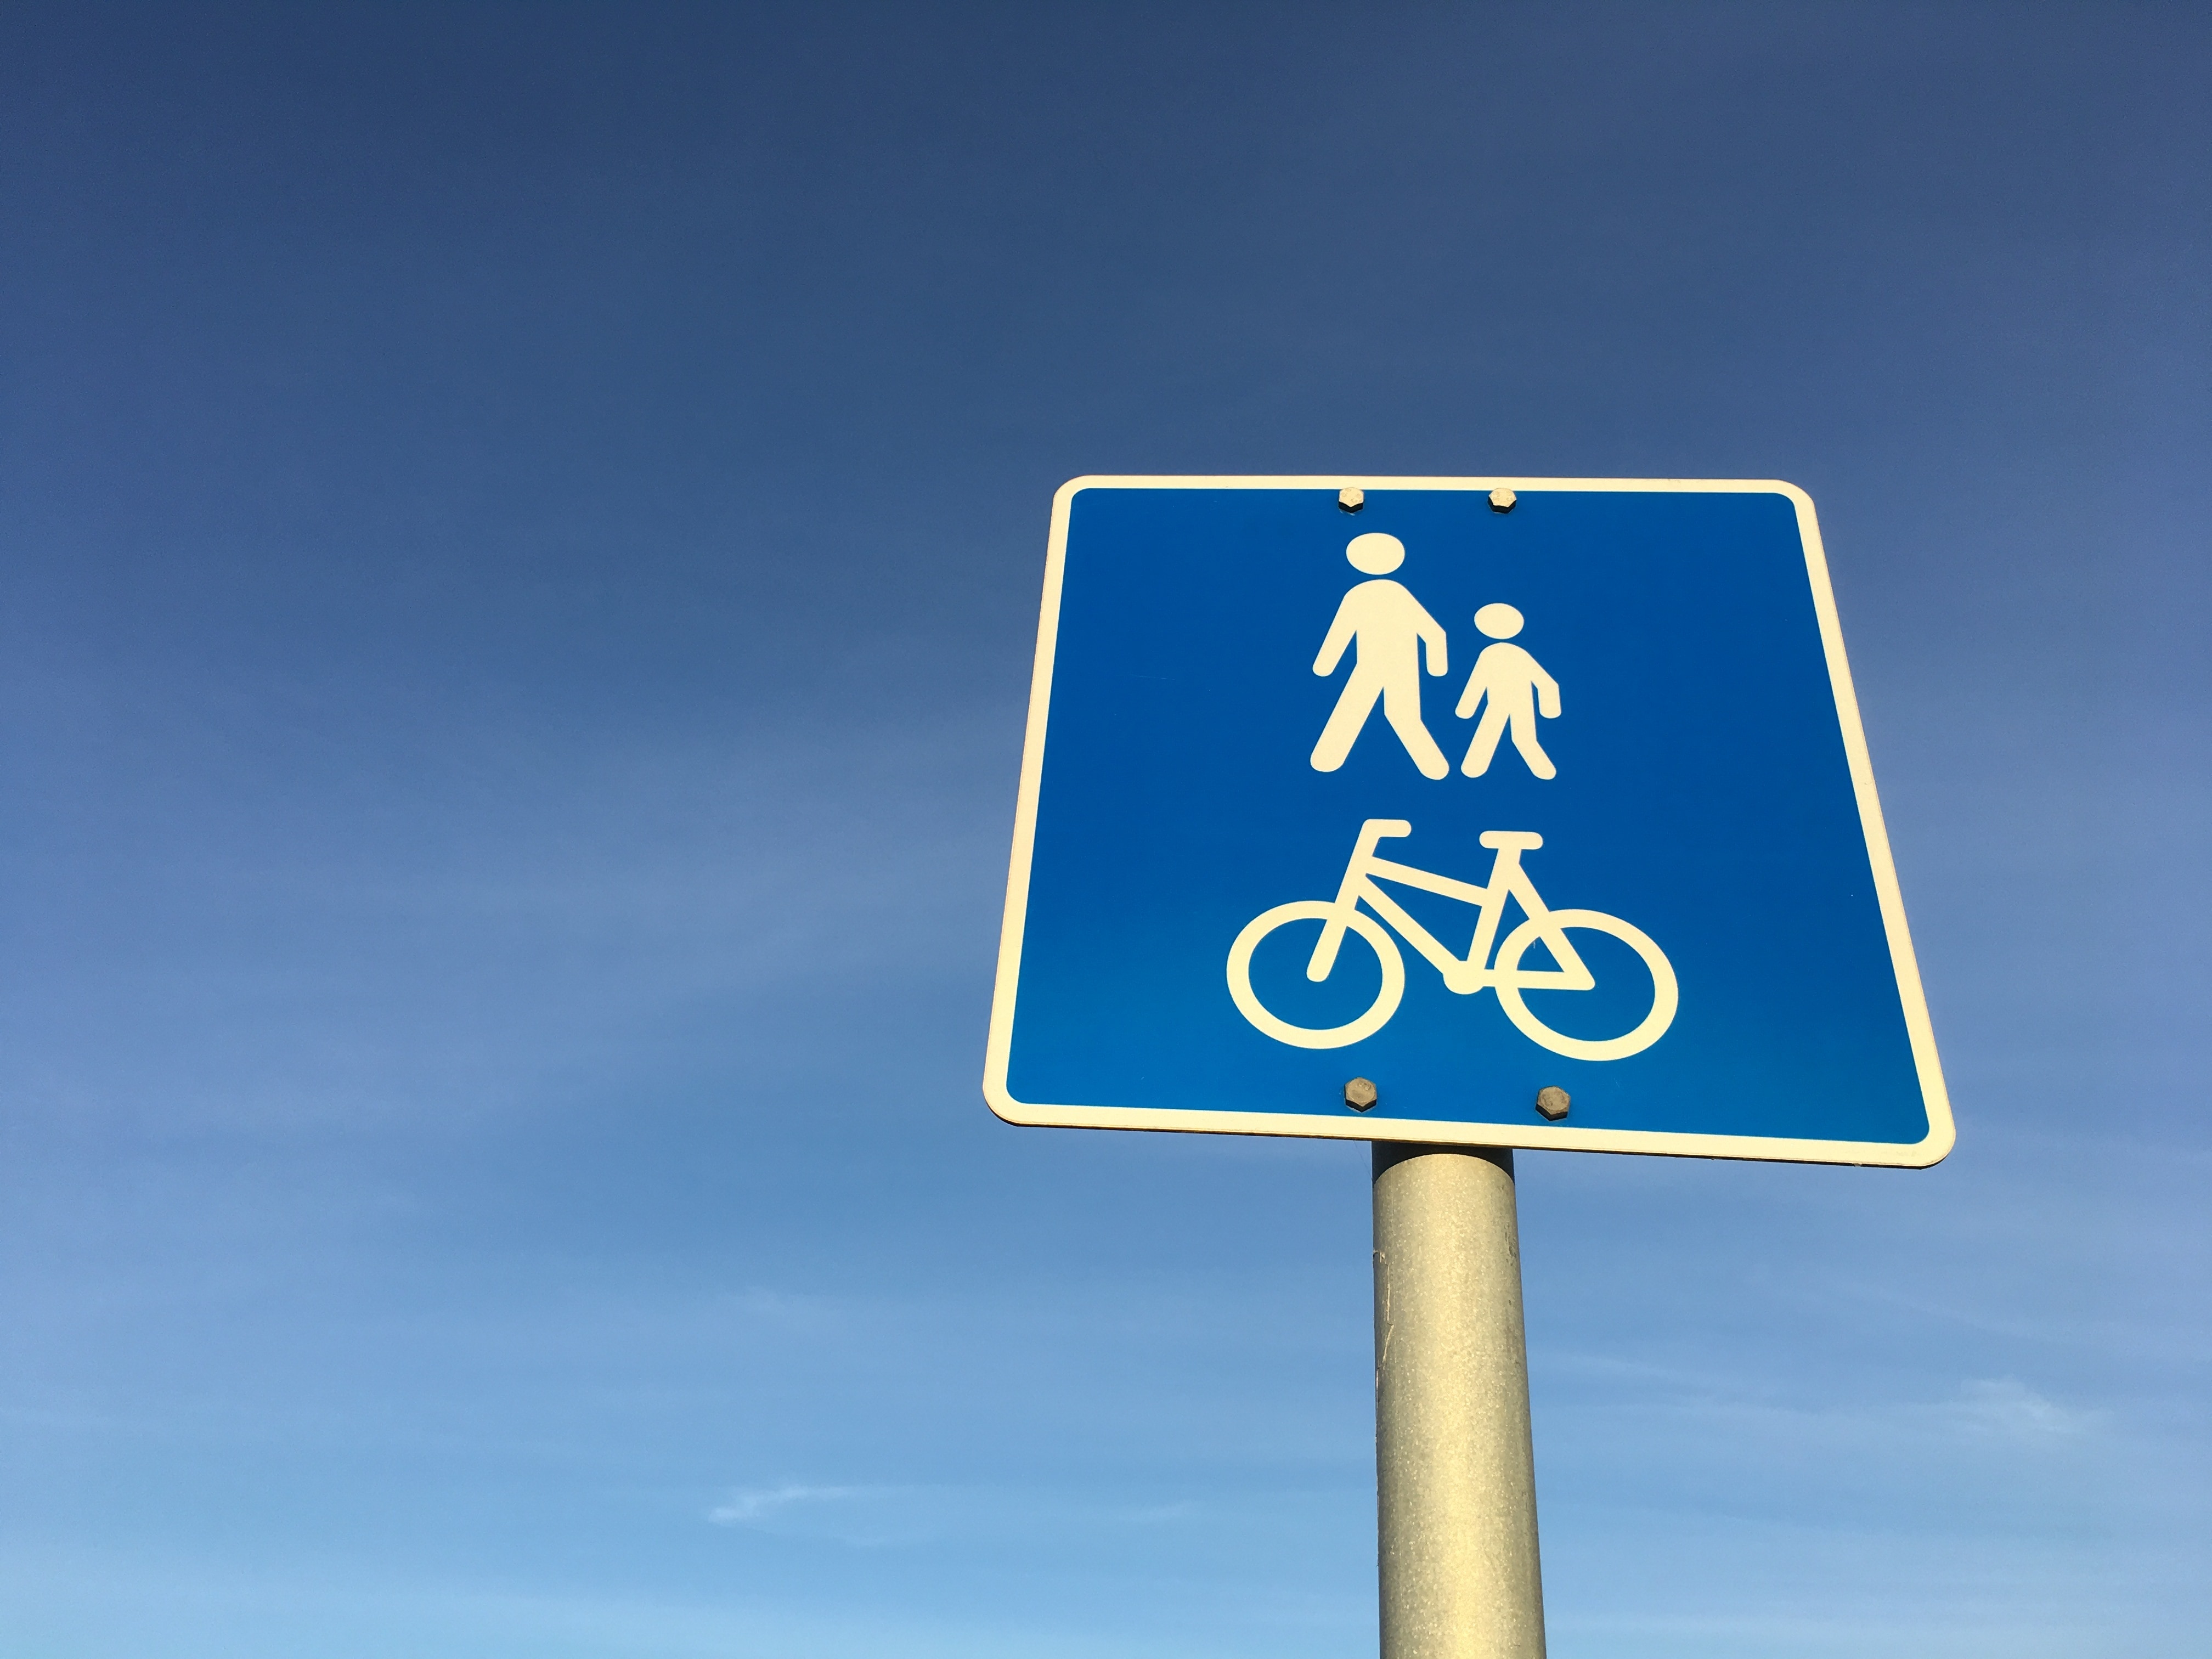 Road Sign, Motorcyclist, Pedestrian, blue, differing abilities